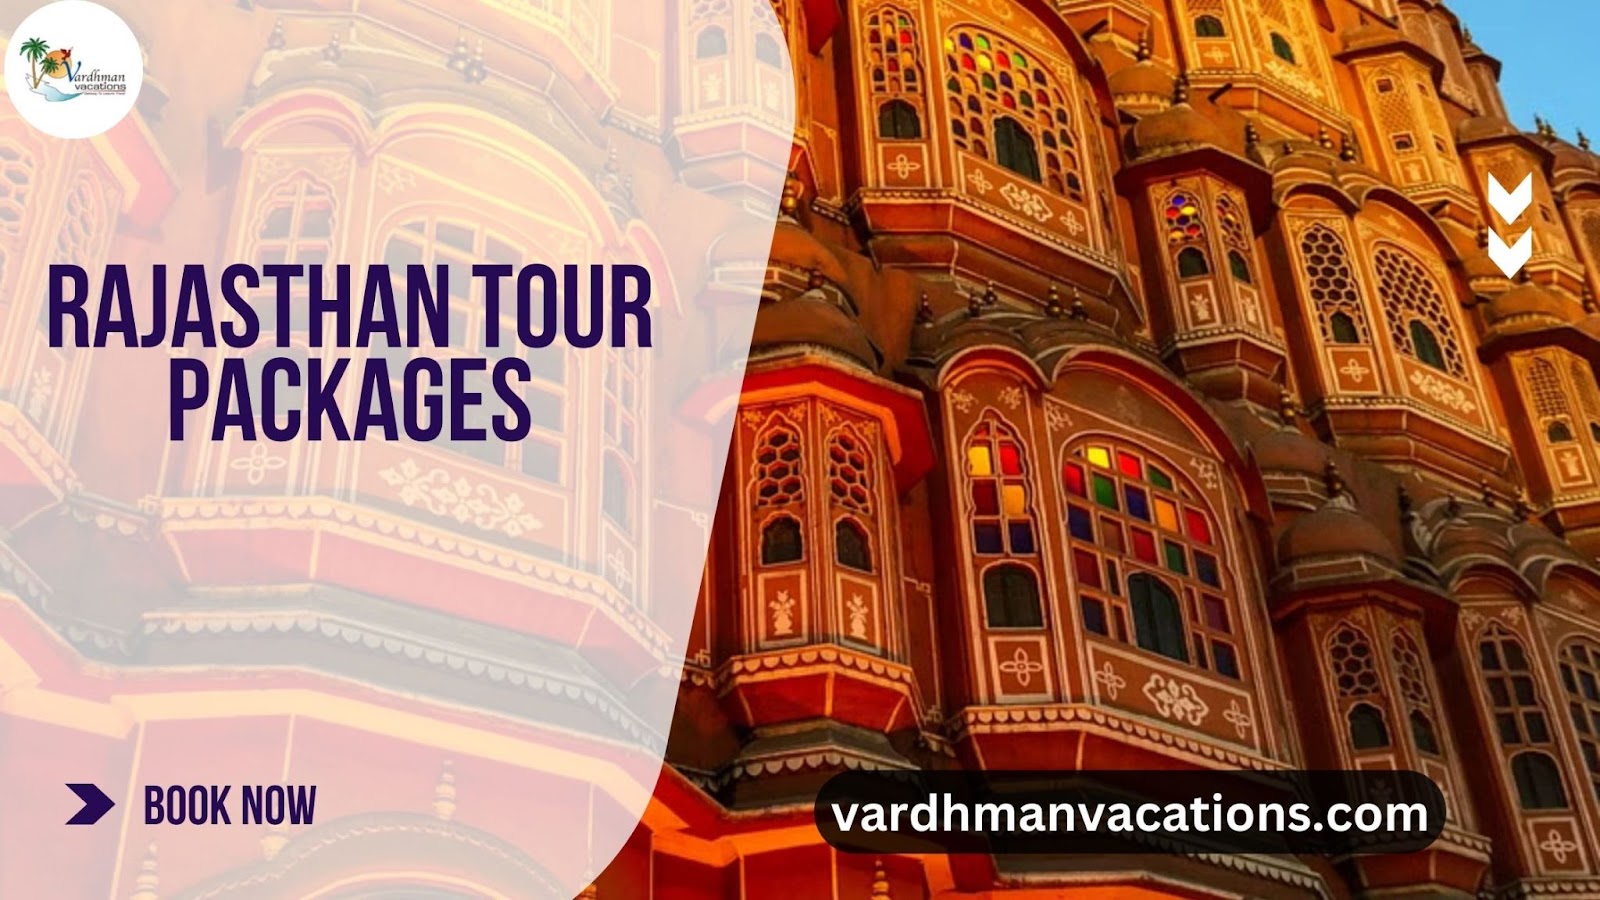 Rajasthan tour packages 